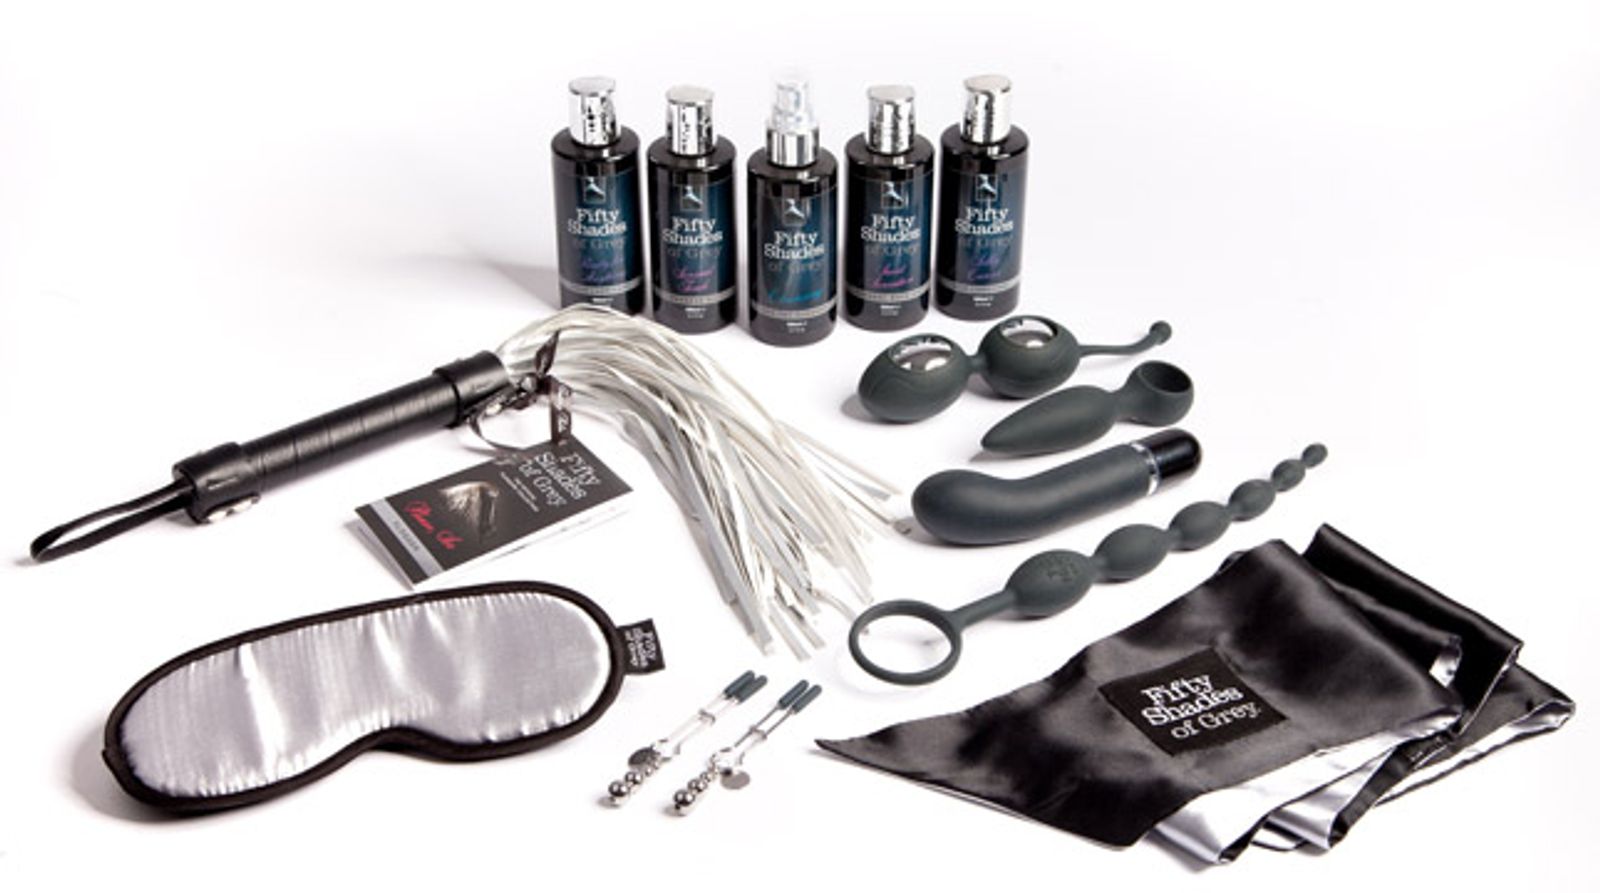 Lovehoney's '50 Shades' Products Up for Merchandising Award